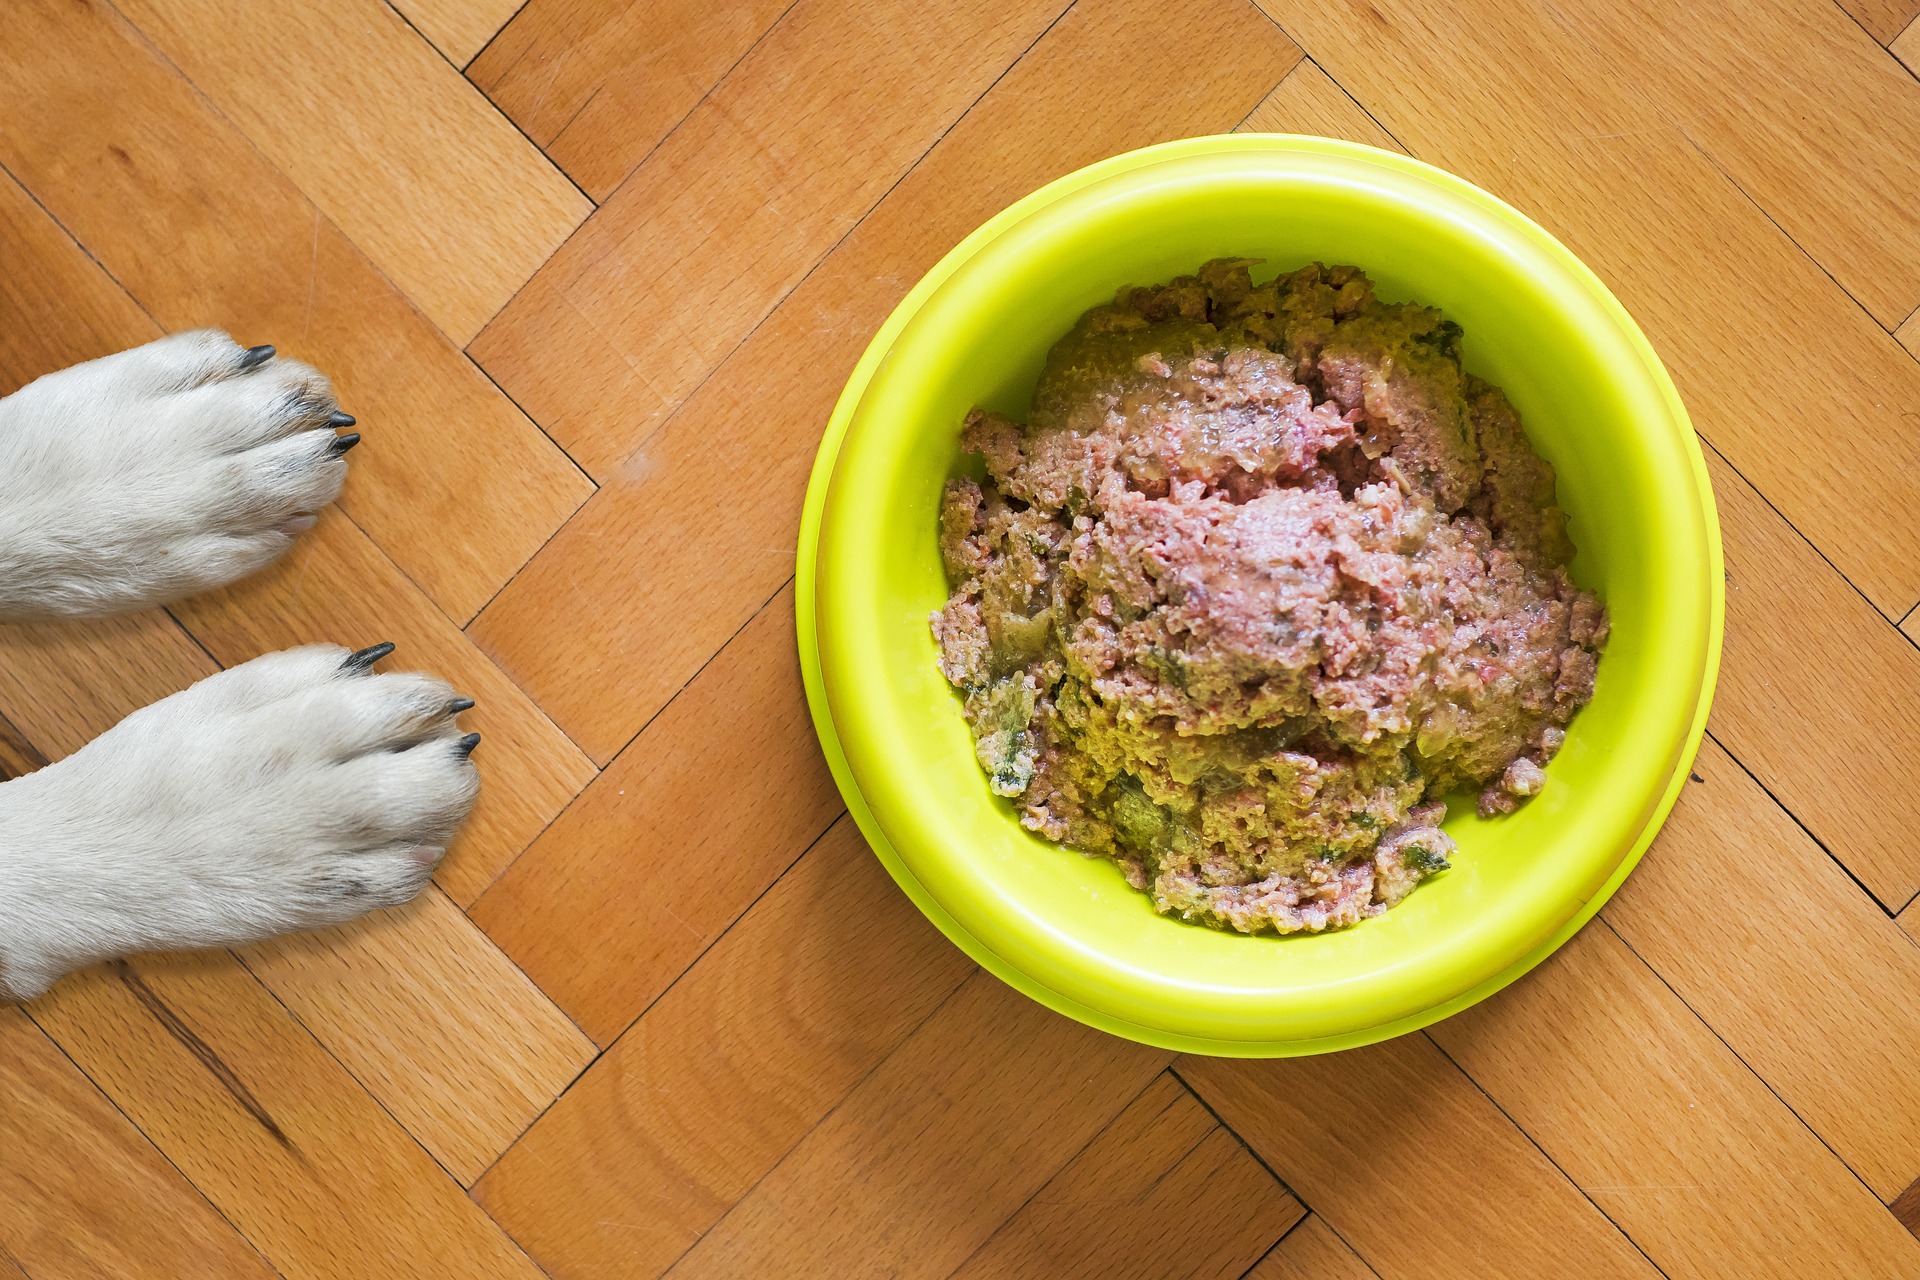 Dog with bowl of minced meat